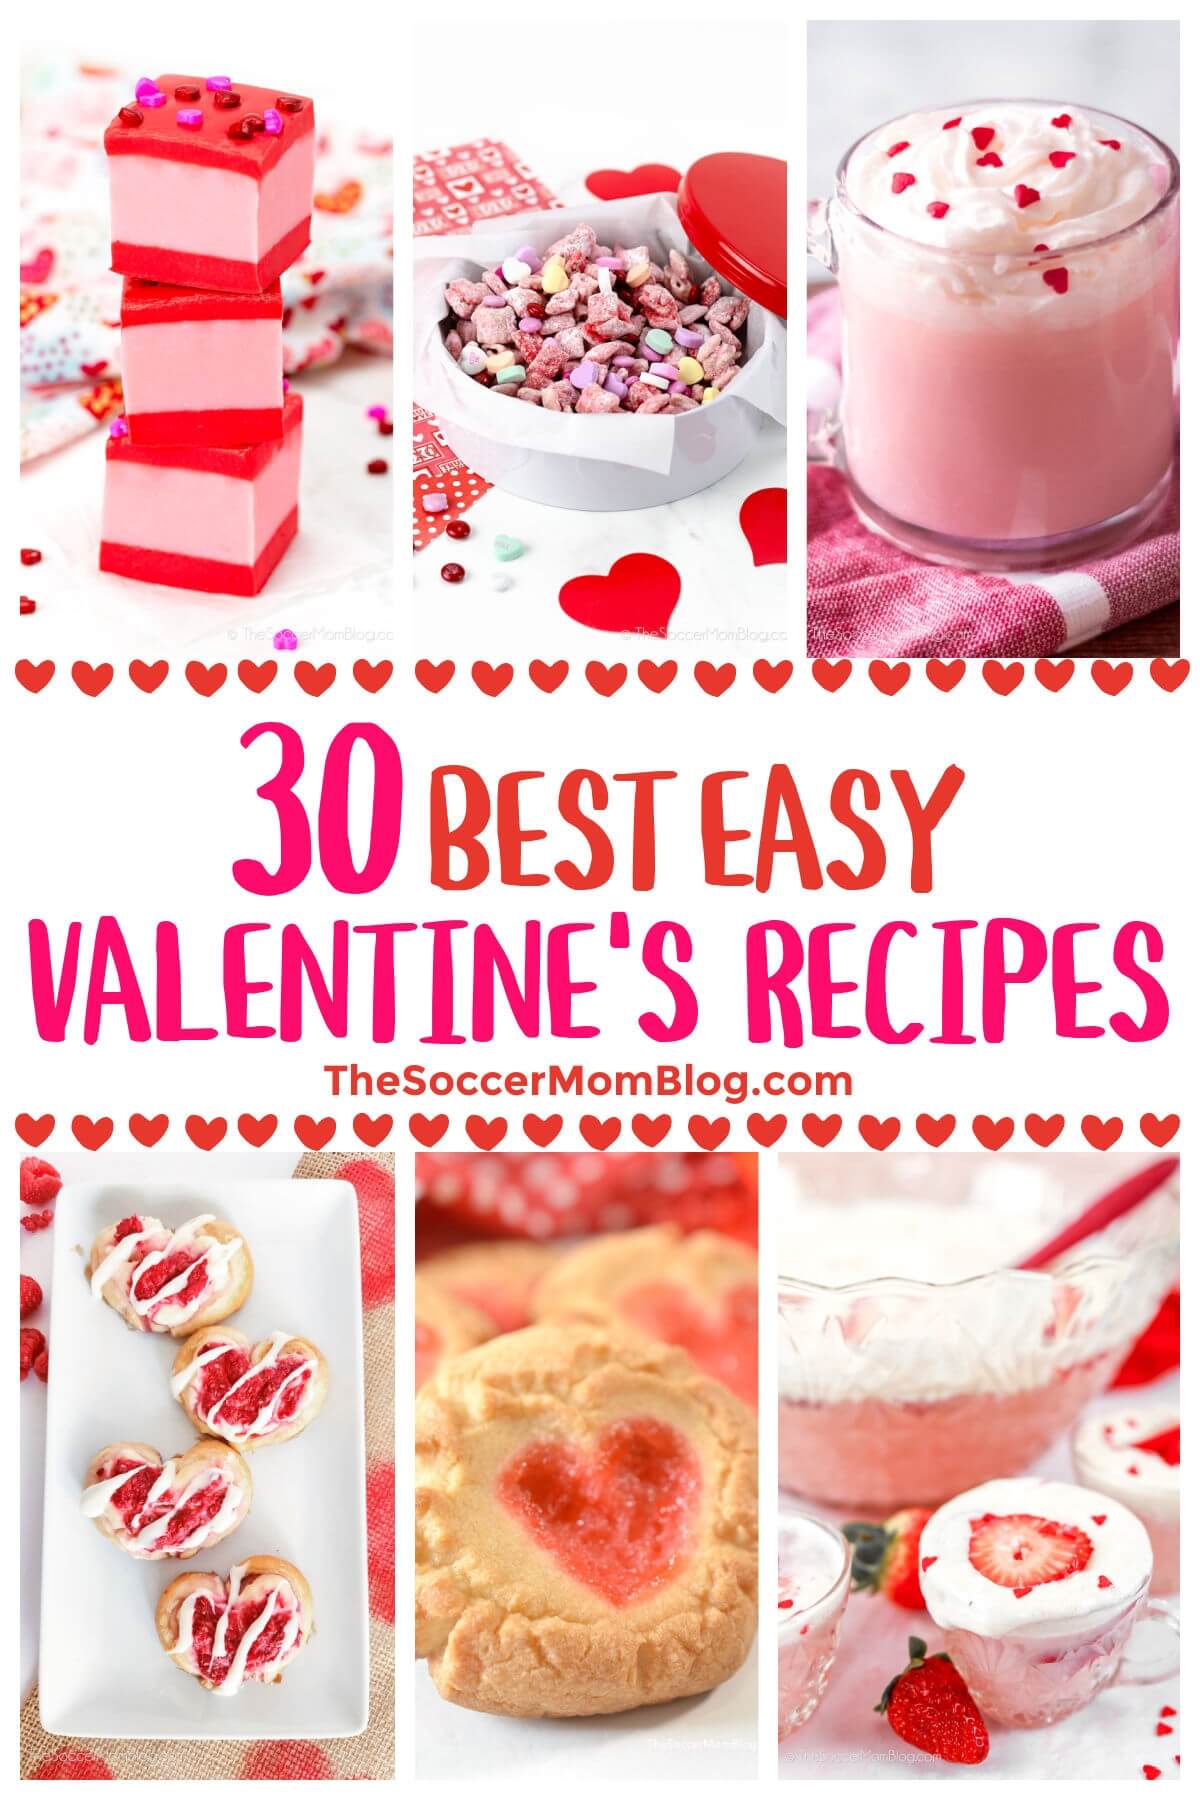 collage image of red and pink Valentine food; text overlay "30 Best Easy Valentine's Recipes"